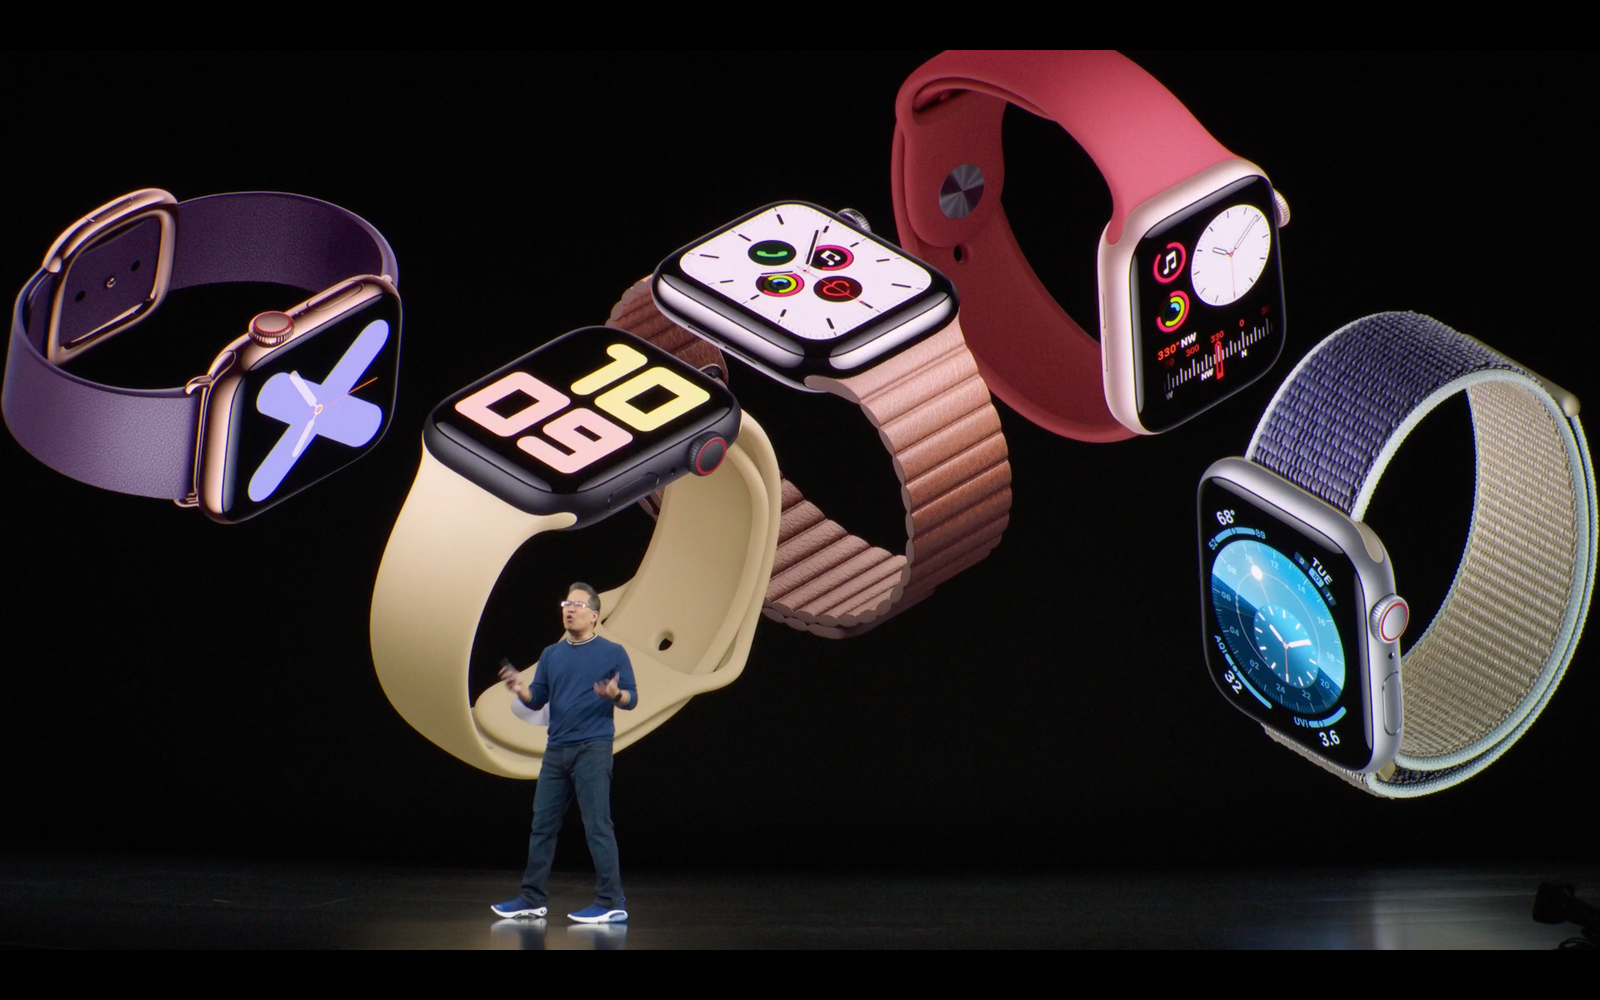 Apple Watch Series 5 on stage at Apple Event